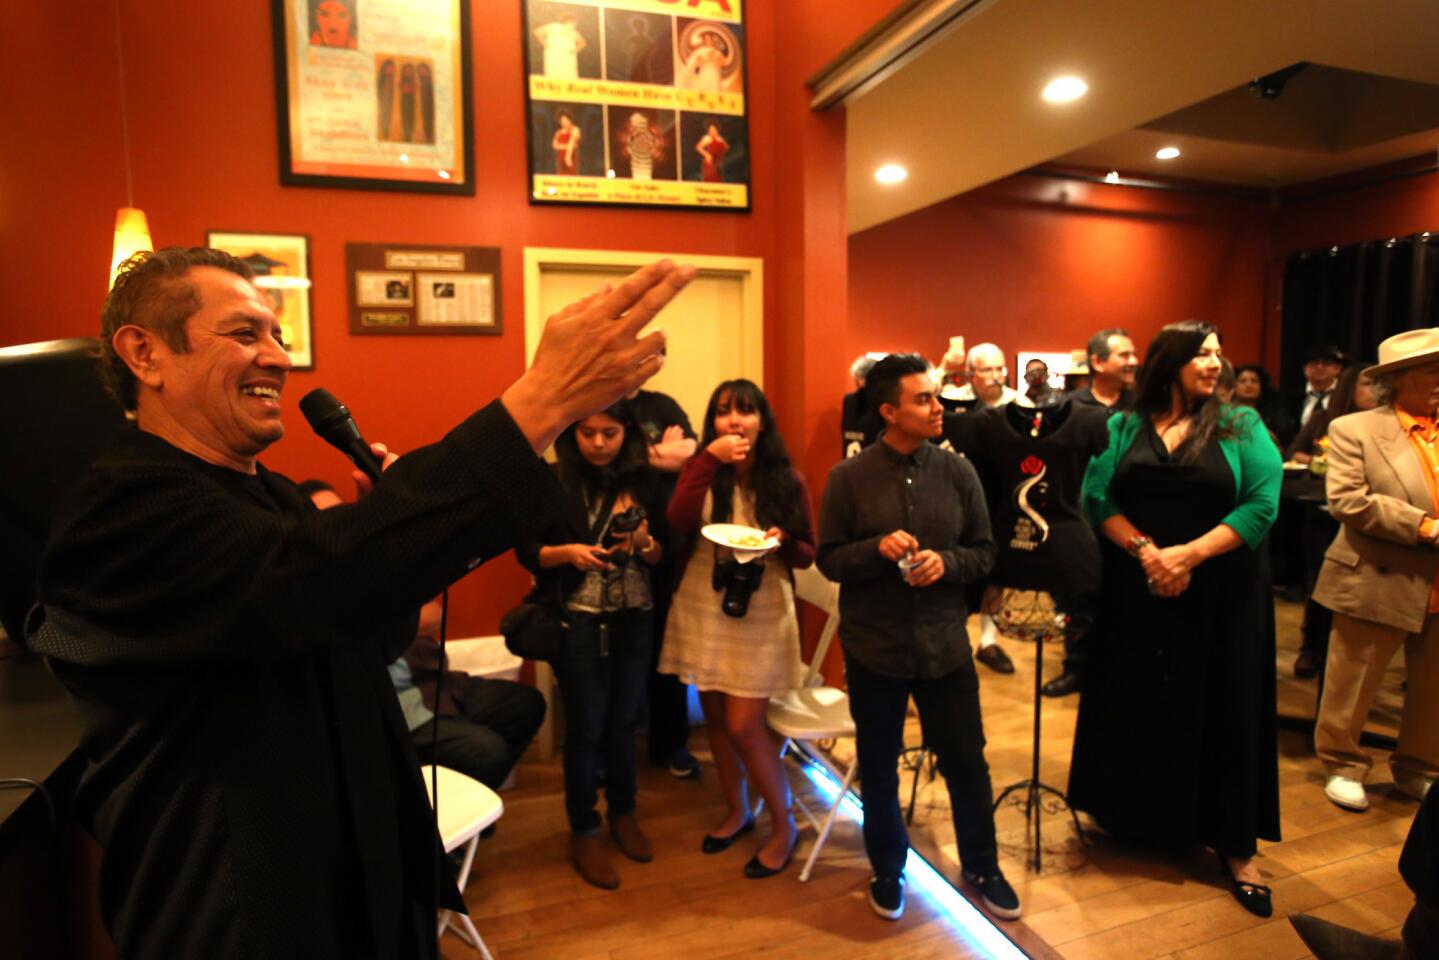 David Reyes gives the opening statement at the opening of the "Roots of the Eastside Sound 1955-1965" exhibit, which features rare photos and memorabilia from the East L.A. rock 'n' roll scene from Reyes' personal collection at the Jean Deleage Art Gallery in the lobby of the Casa 0101 Theater in Boyle Heights.